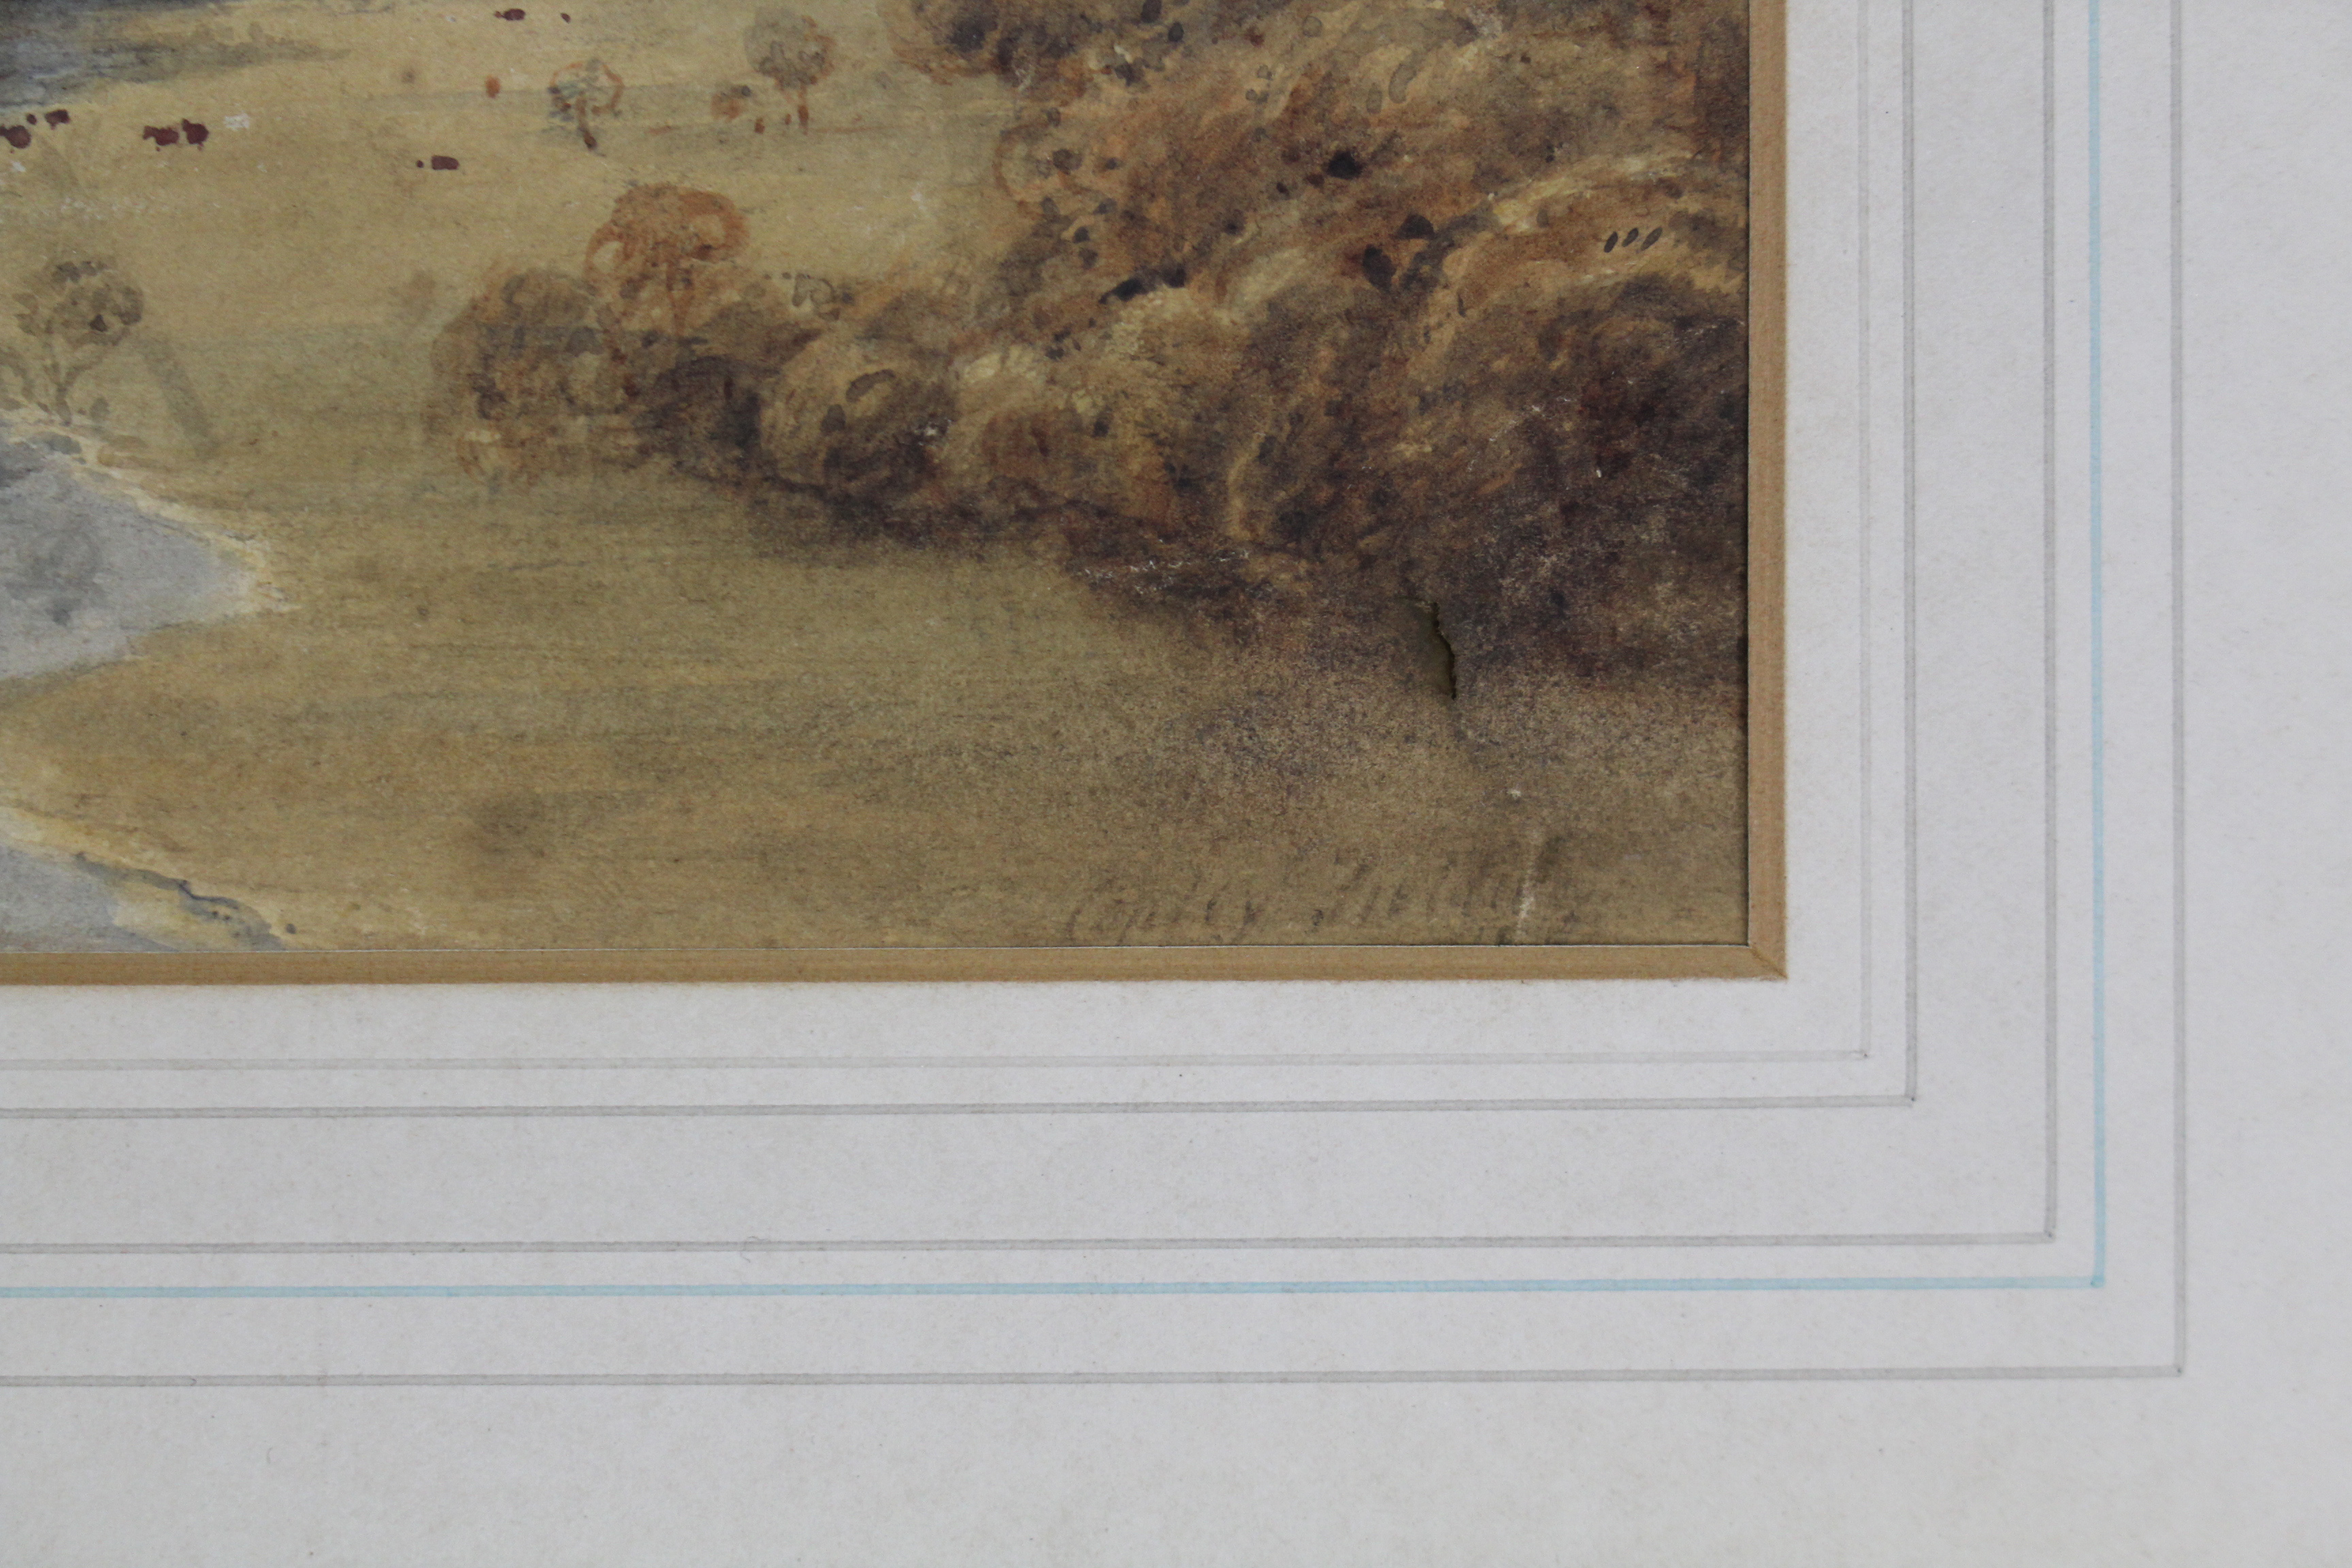 Attr. to ANTHONY VANDYKE COPLEY FIELDING, P.O.W.S. (1787-1855). An extensive landscape with river - Image 2 of 3